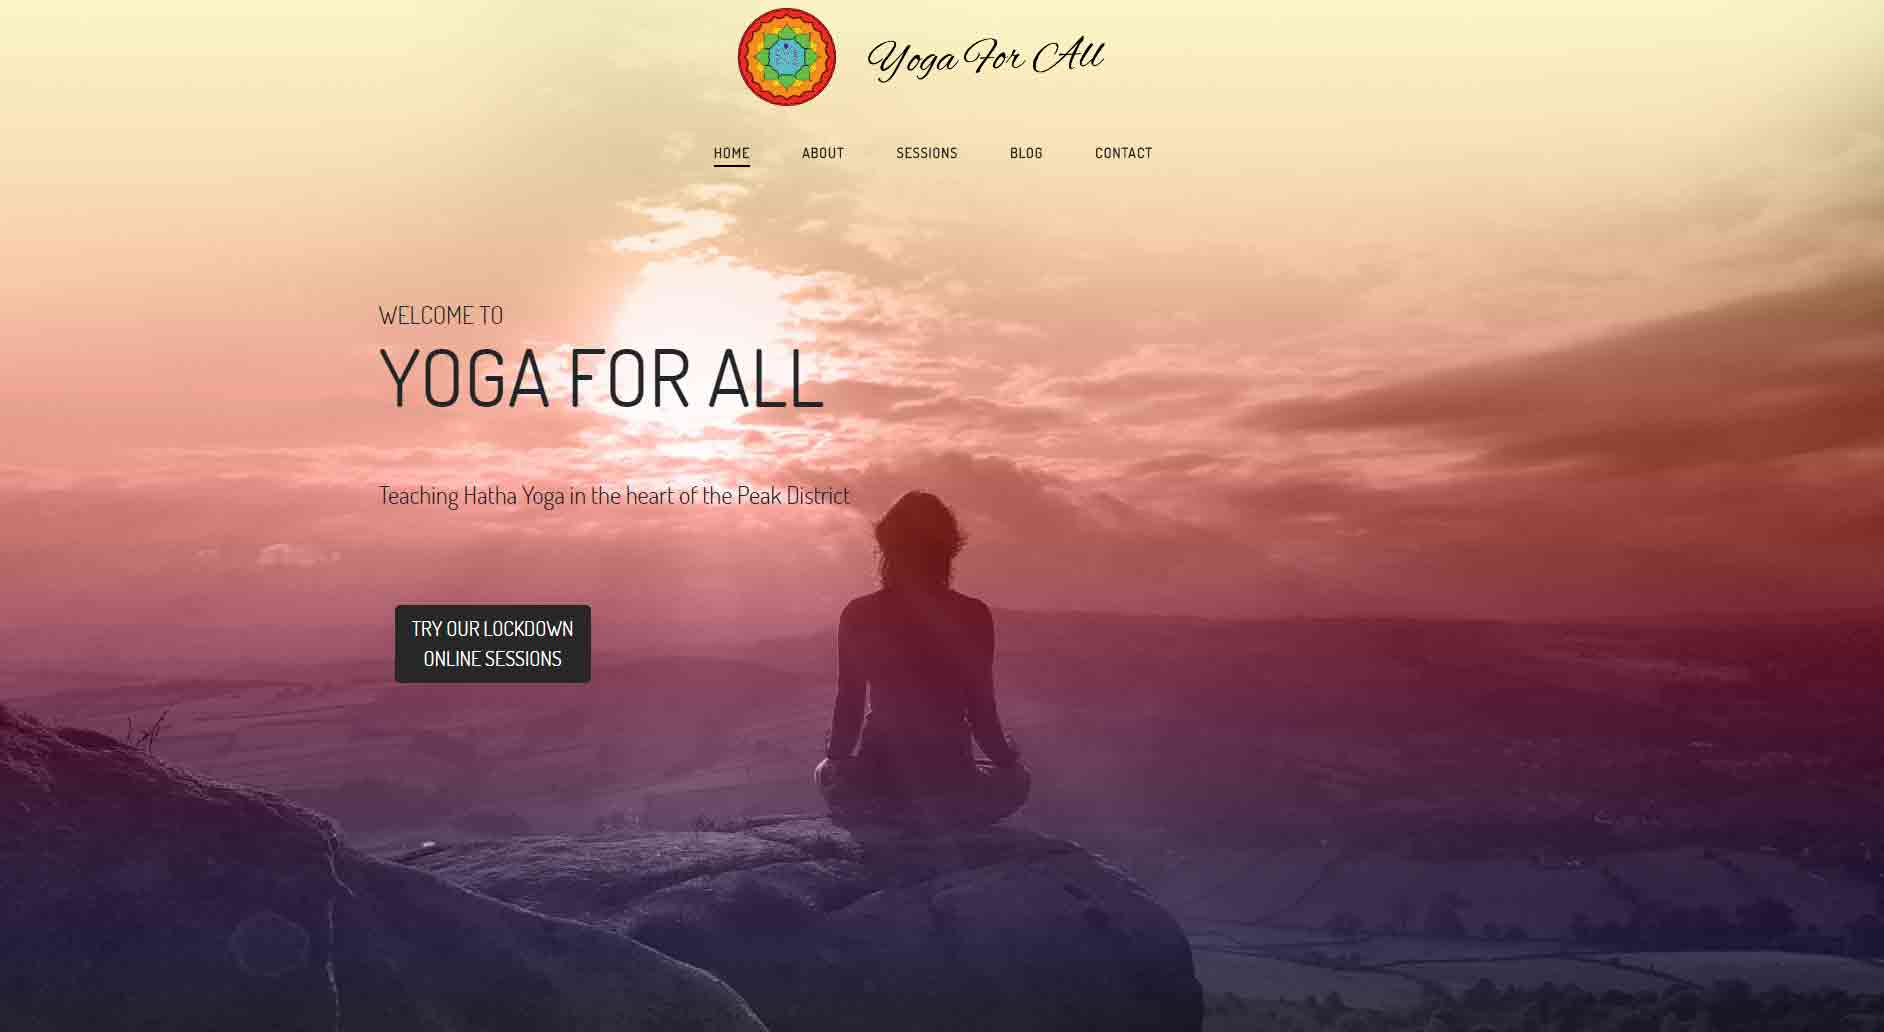 Yoga For All - by Cecil Web Designs